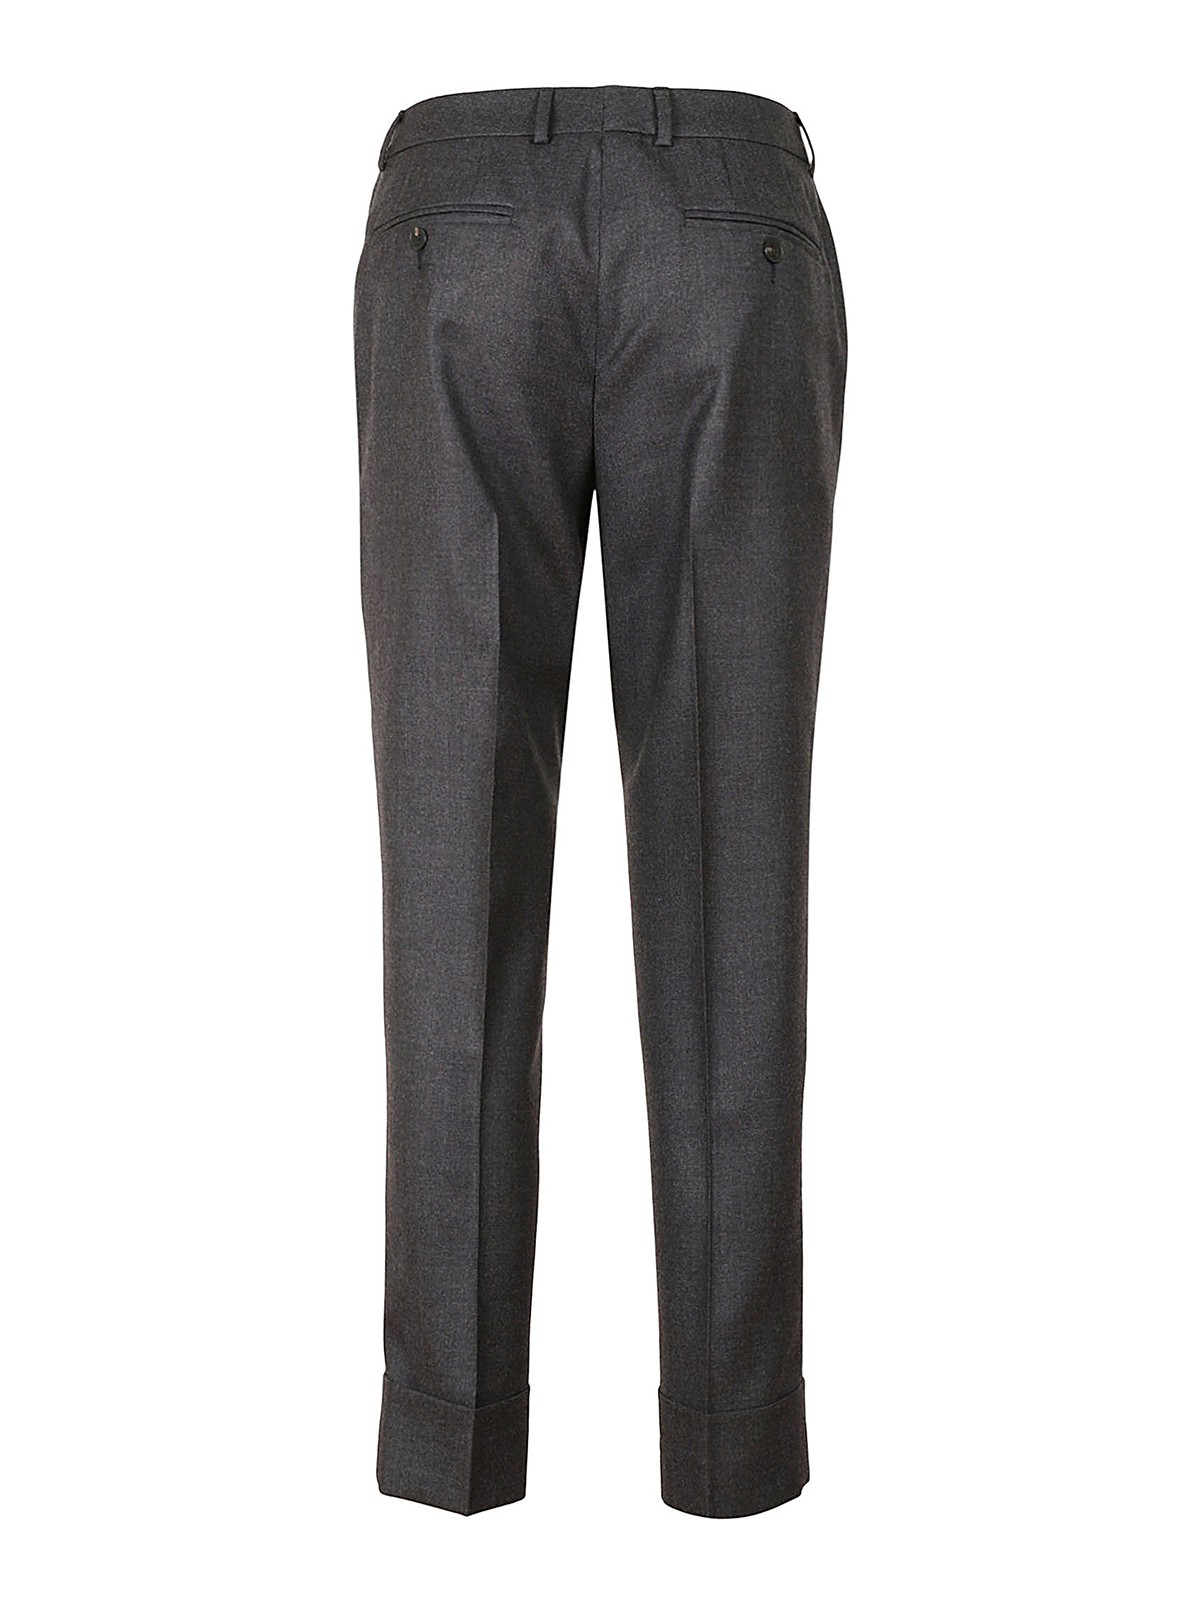 Caine MidGrey Flannel Trousers  Kit Blake